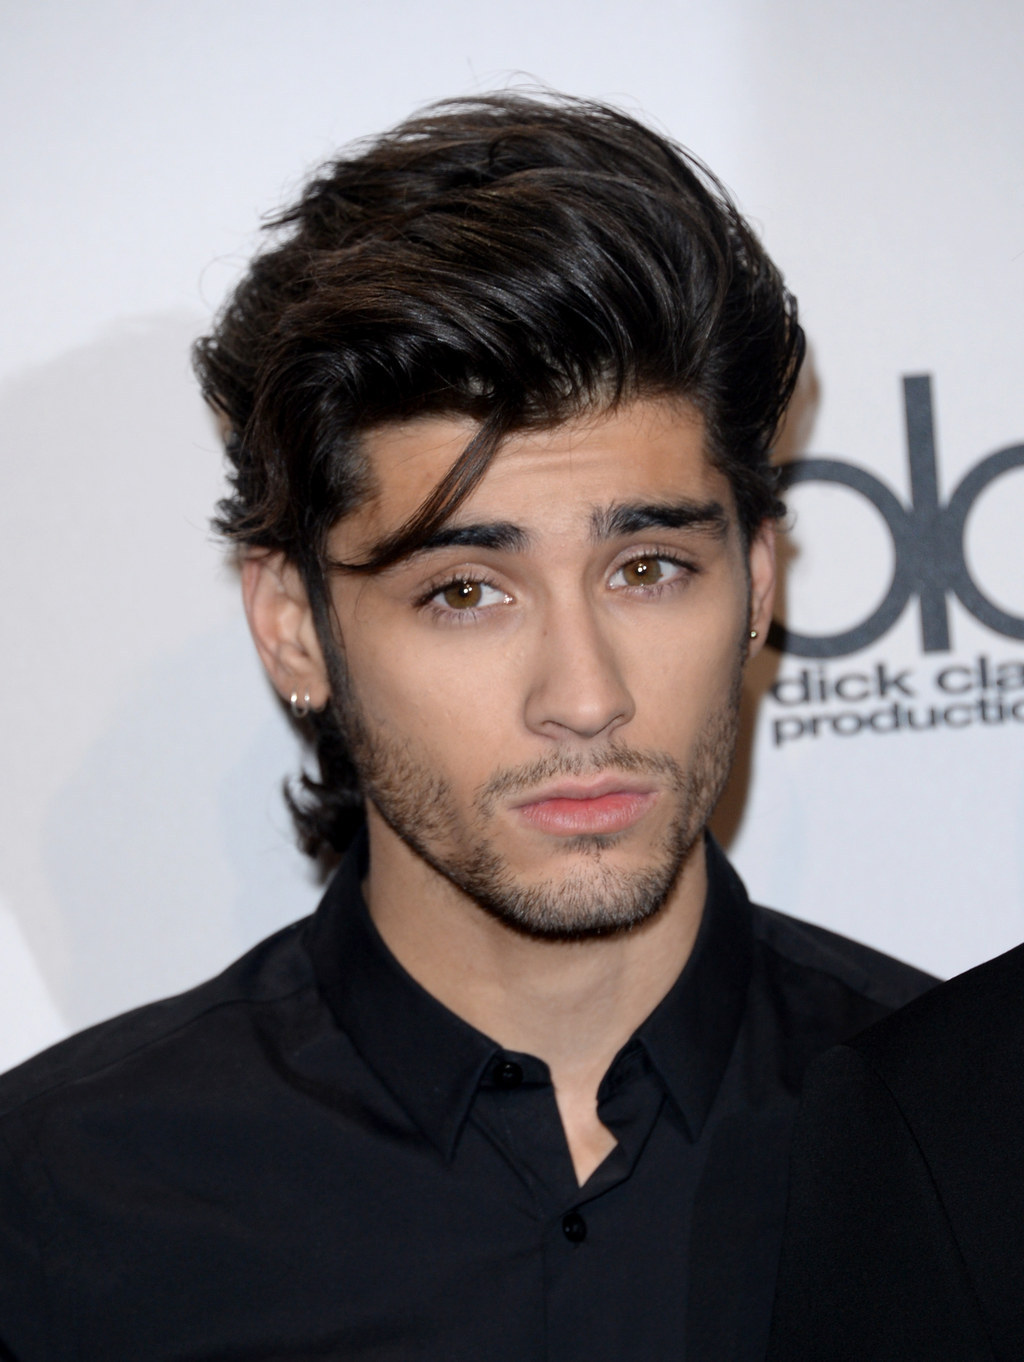 Zayn Malik Has Left One Direction And The Internet's Lost Its Mind